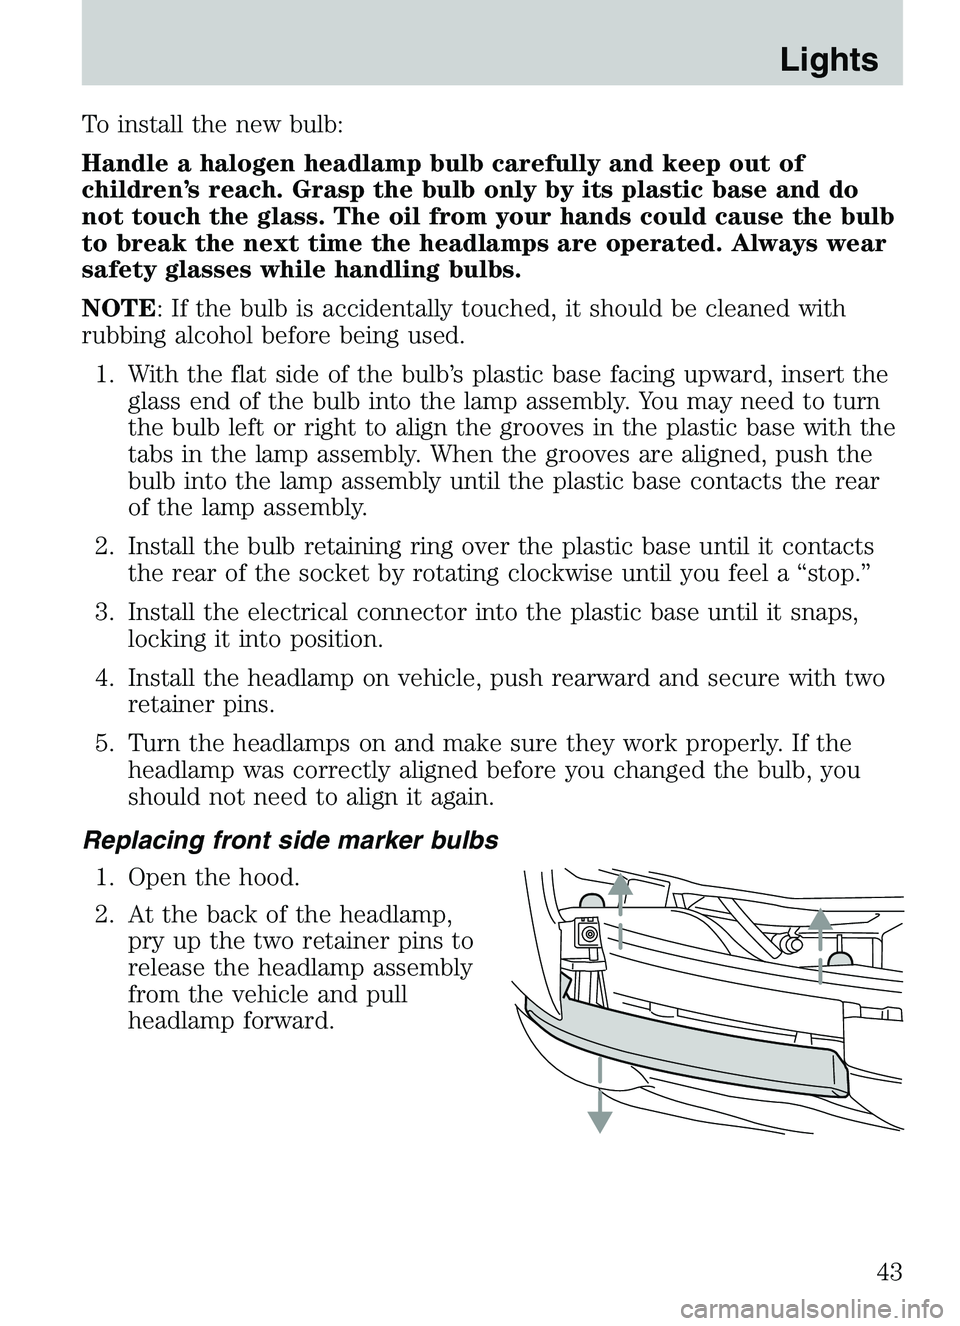 MAZDA MODEL B4000 4WD 2003  Owners Manual To install the new bulb:
Handle a halogen headlamp bulb carefully and keep out of
children’s reach. Grasp the bulb only by its plastic base and do
not touch the glass. The oil from your hands could 